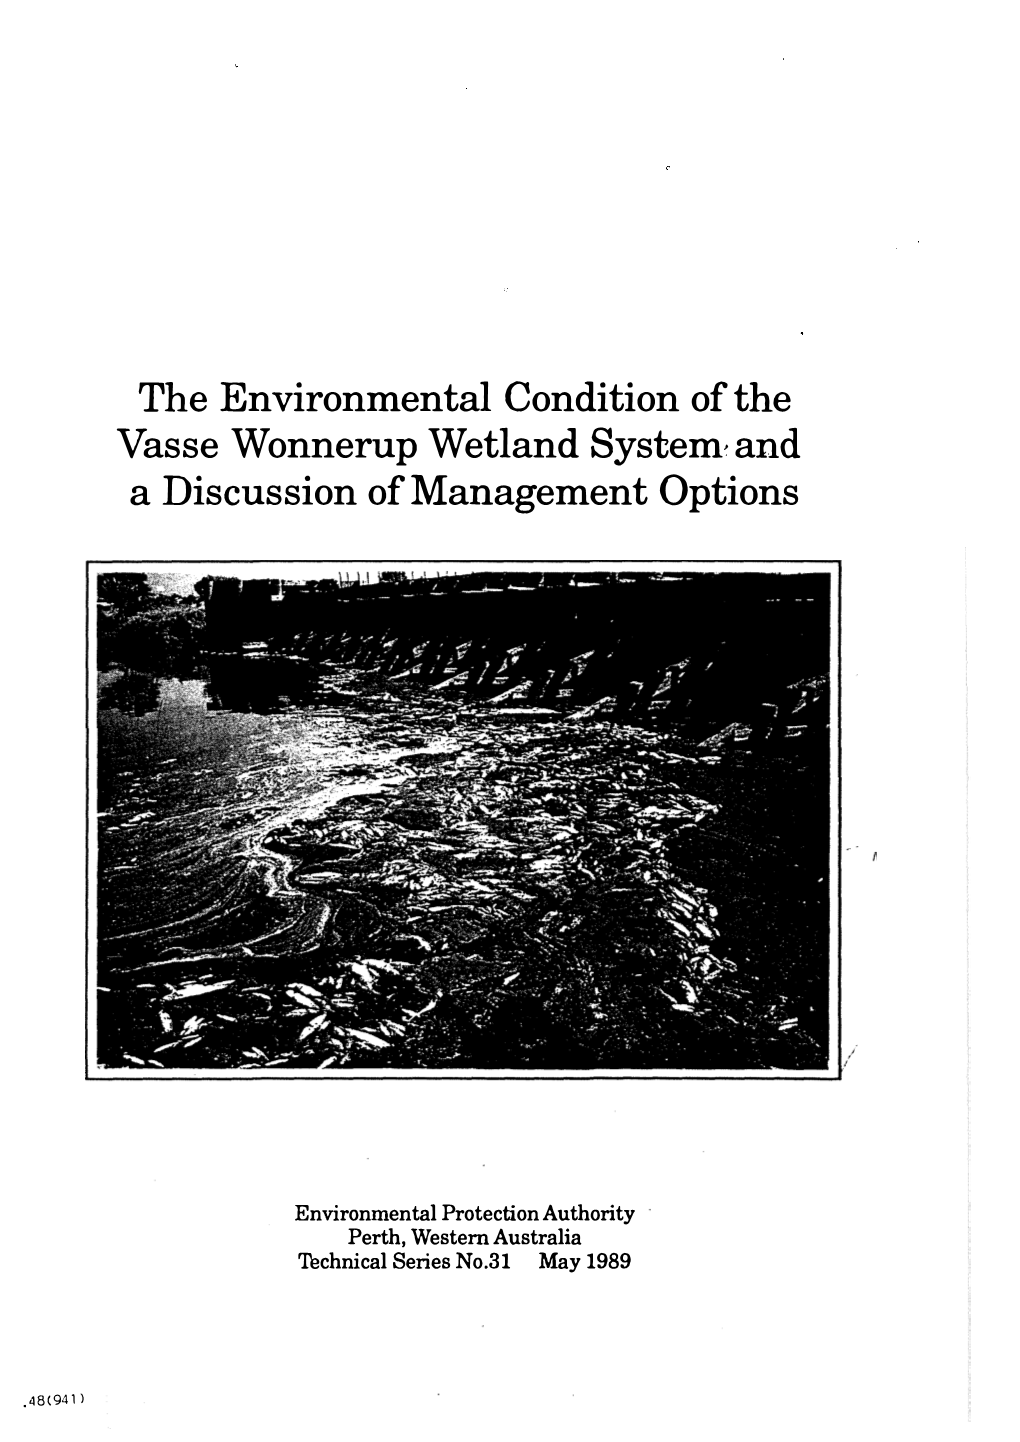 The Environmental Condition of the Vasse Wonnerup Wetland System� and a Discussion of Management Options